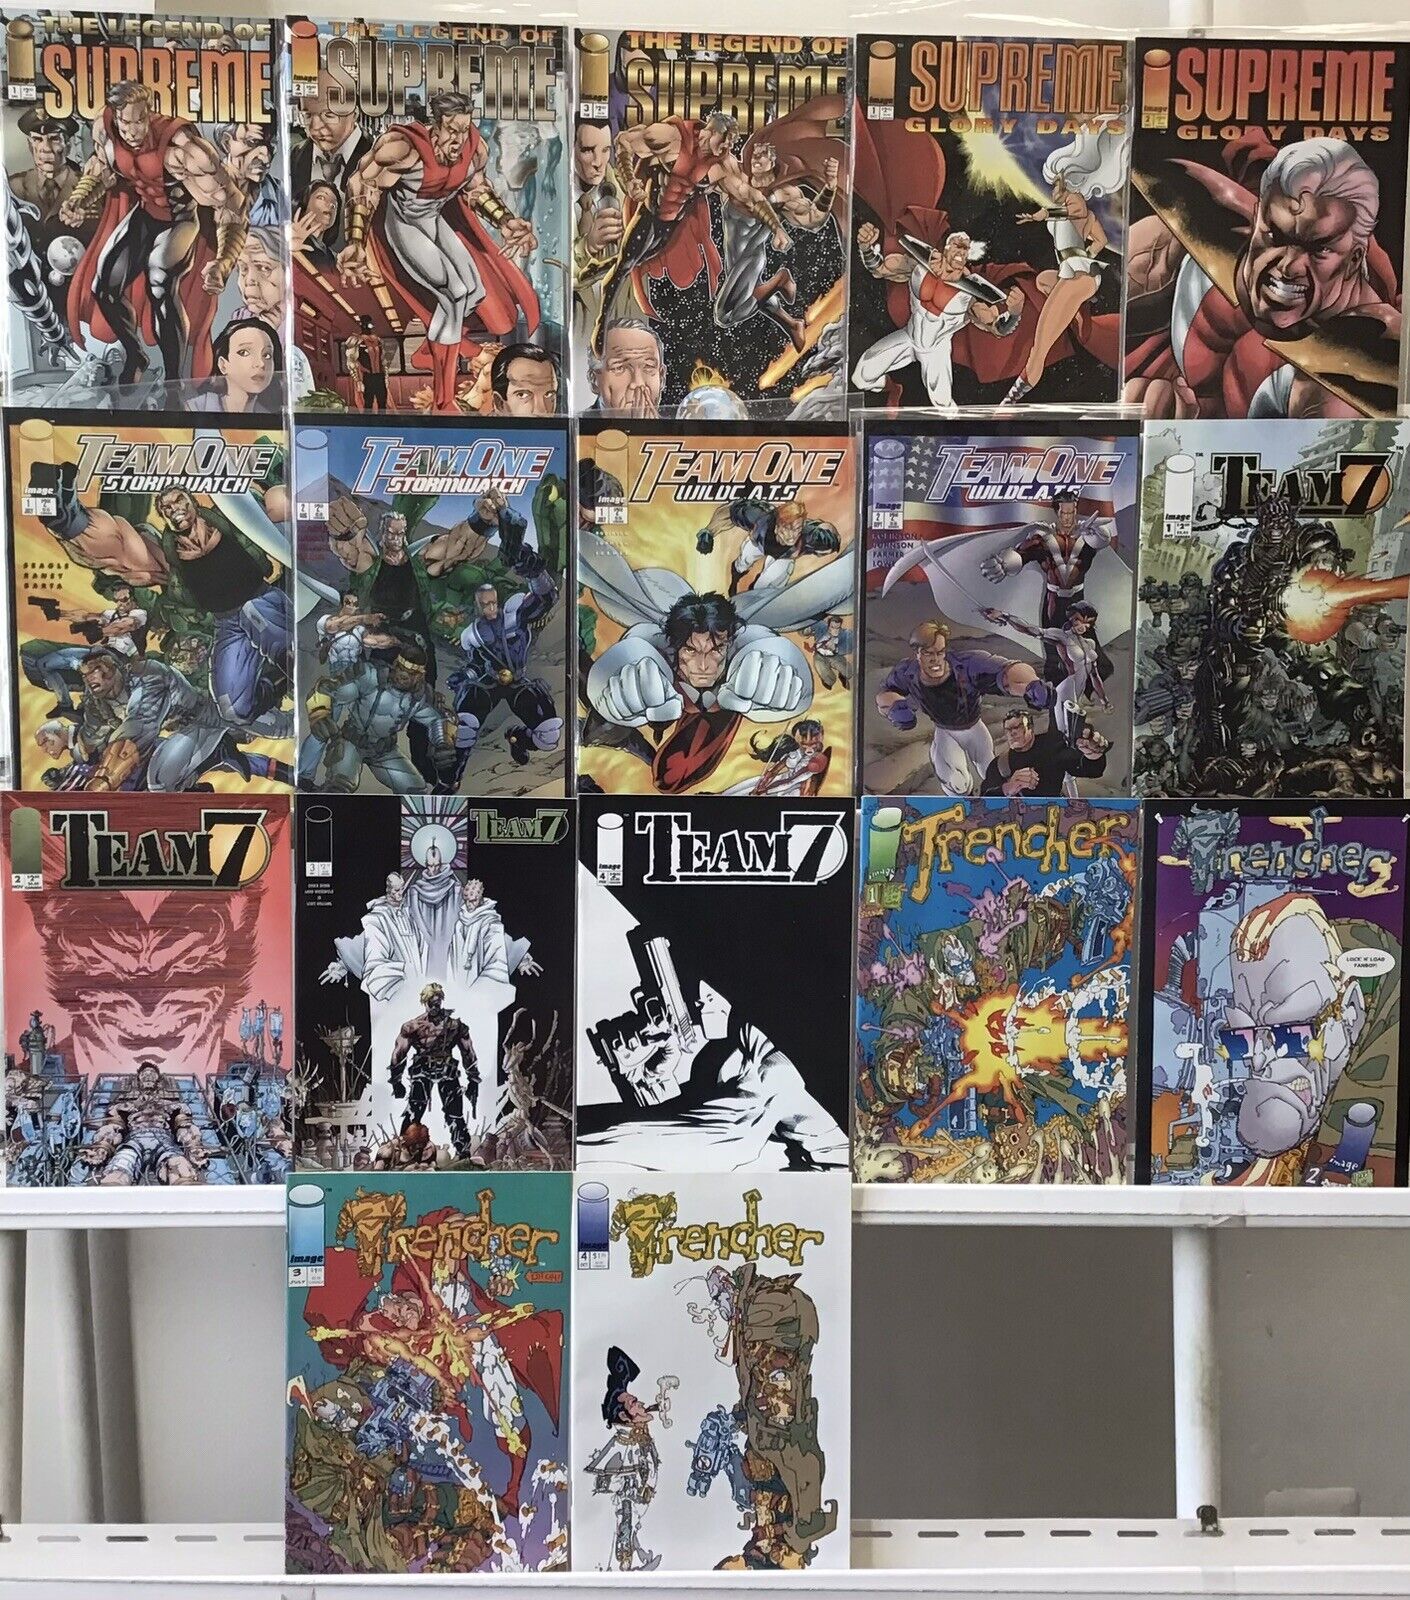 Image Comic Sets - The Legend Of Supreme, Team One, Team 7, Trencher - See Bio